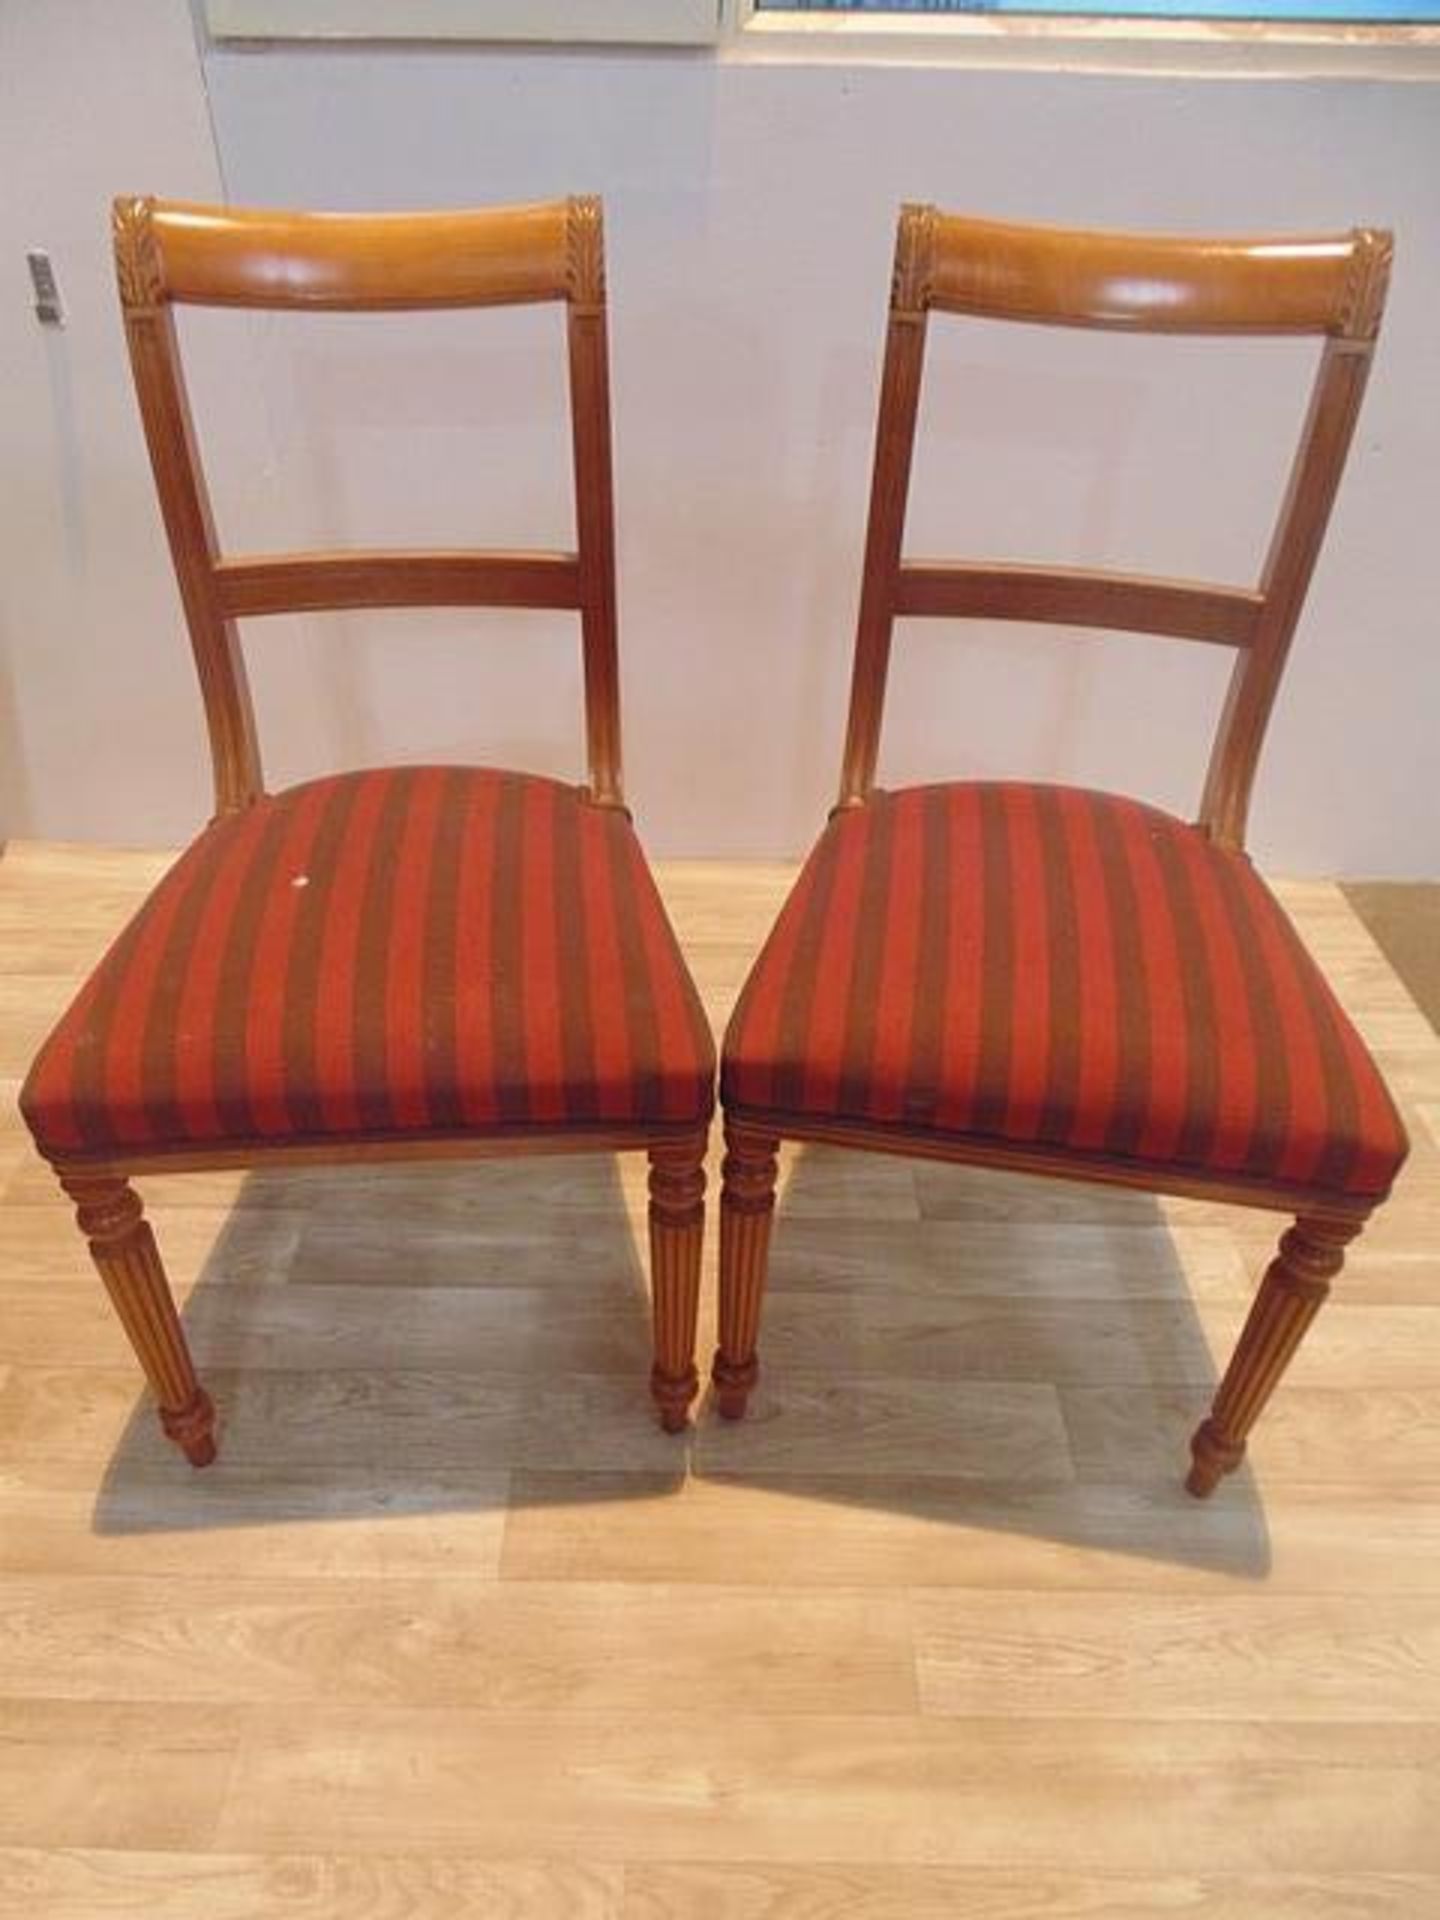 A set of four Regency style striped mahogany dining chairs, moulded top rails over a central